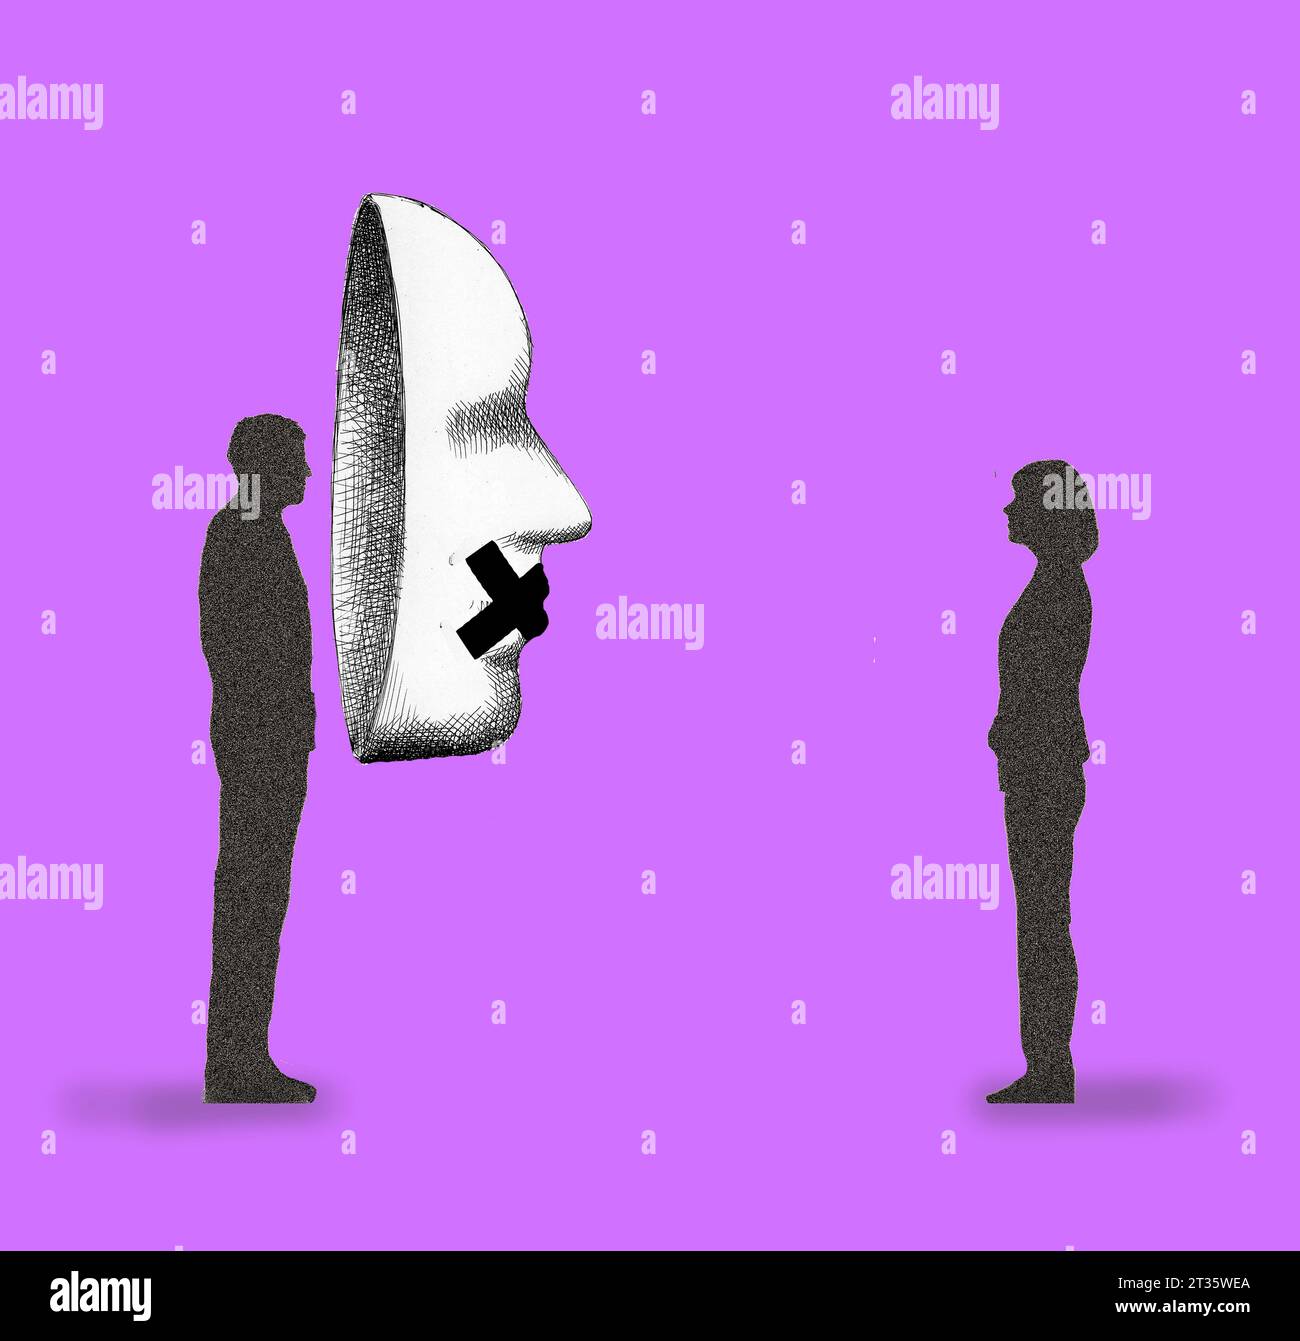 Illustration of couple standing face to face with man hiding behind oversized mask with taped mouth Stock Photo